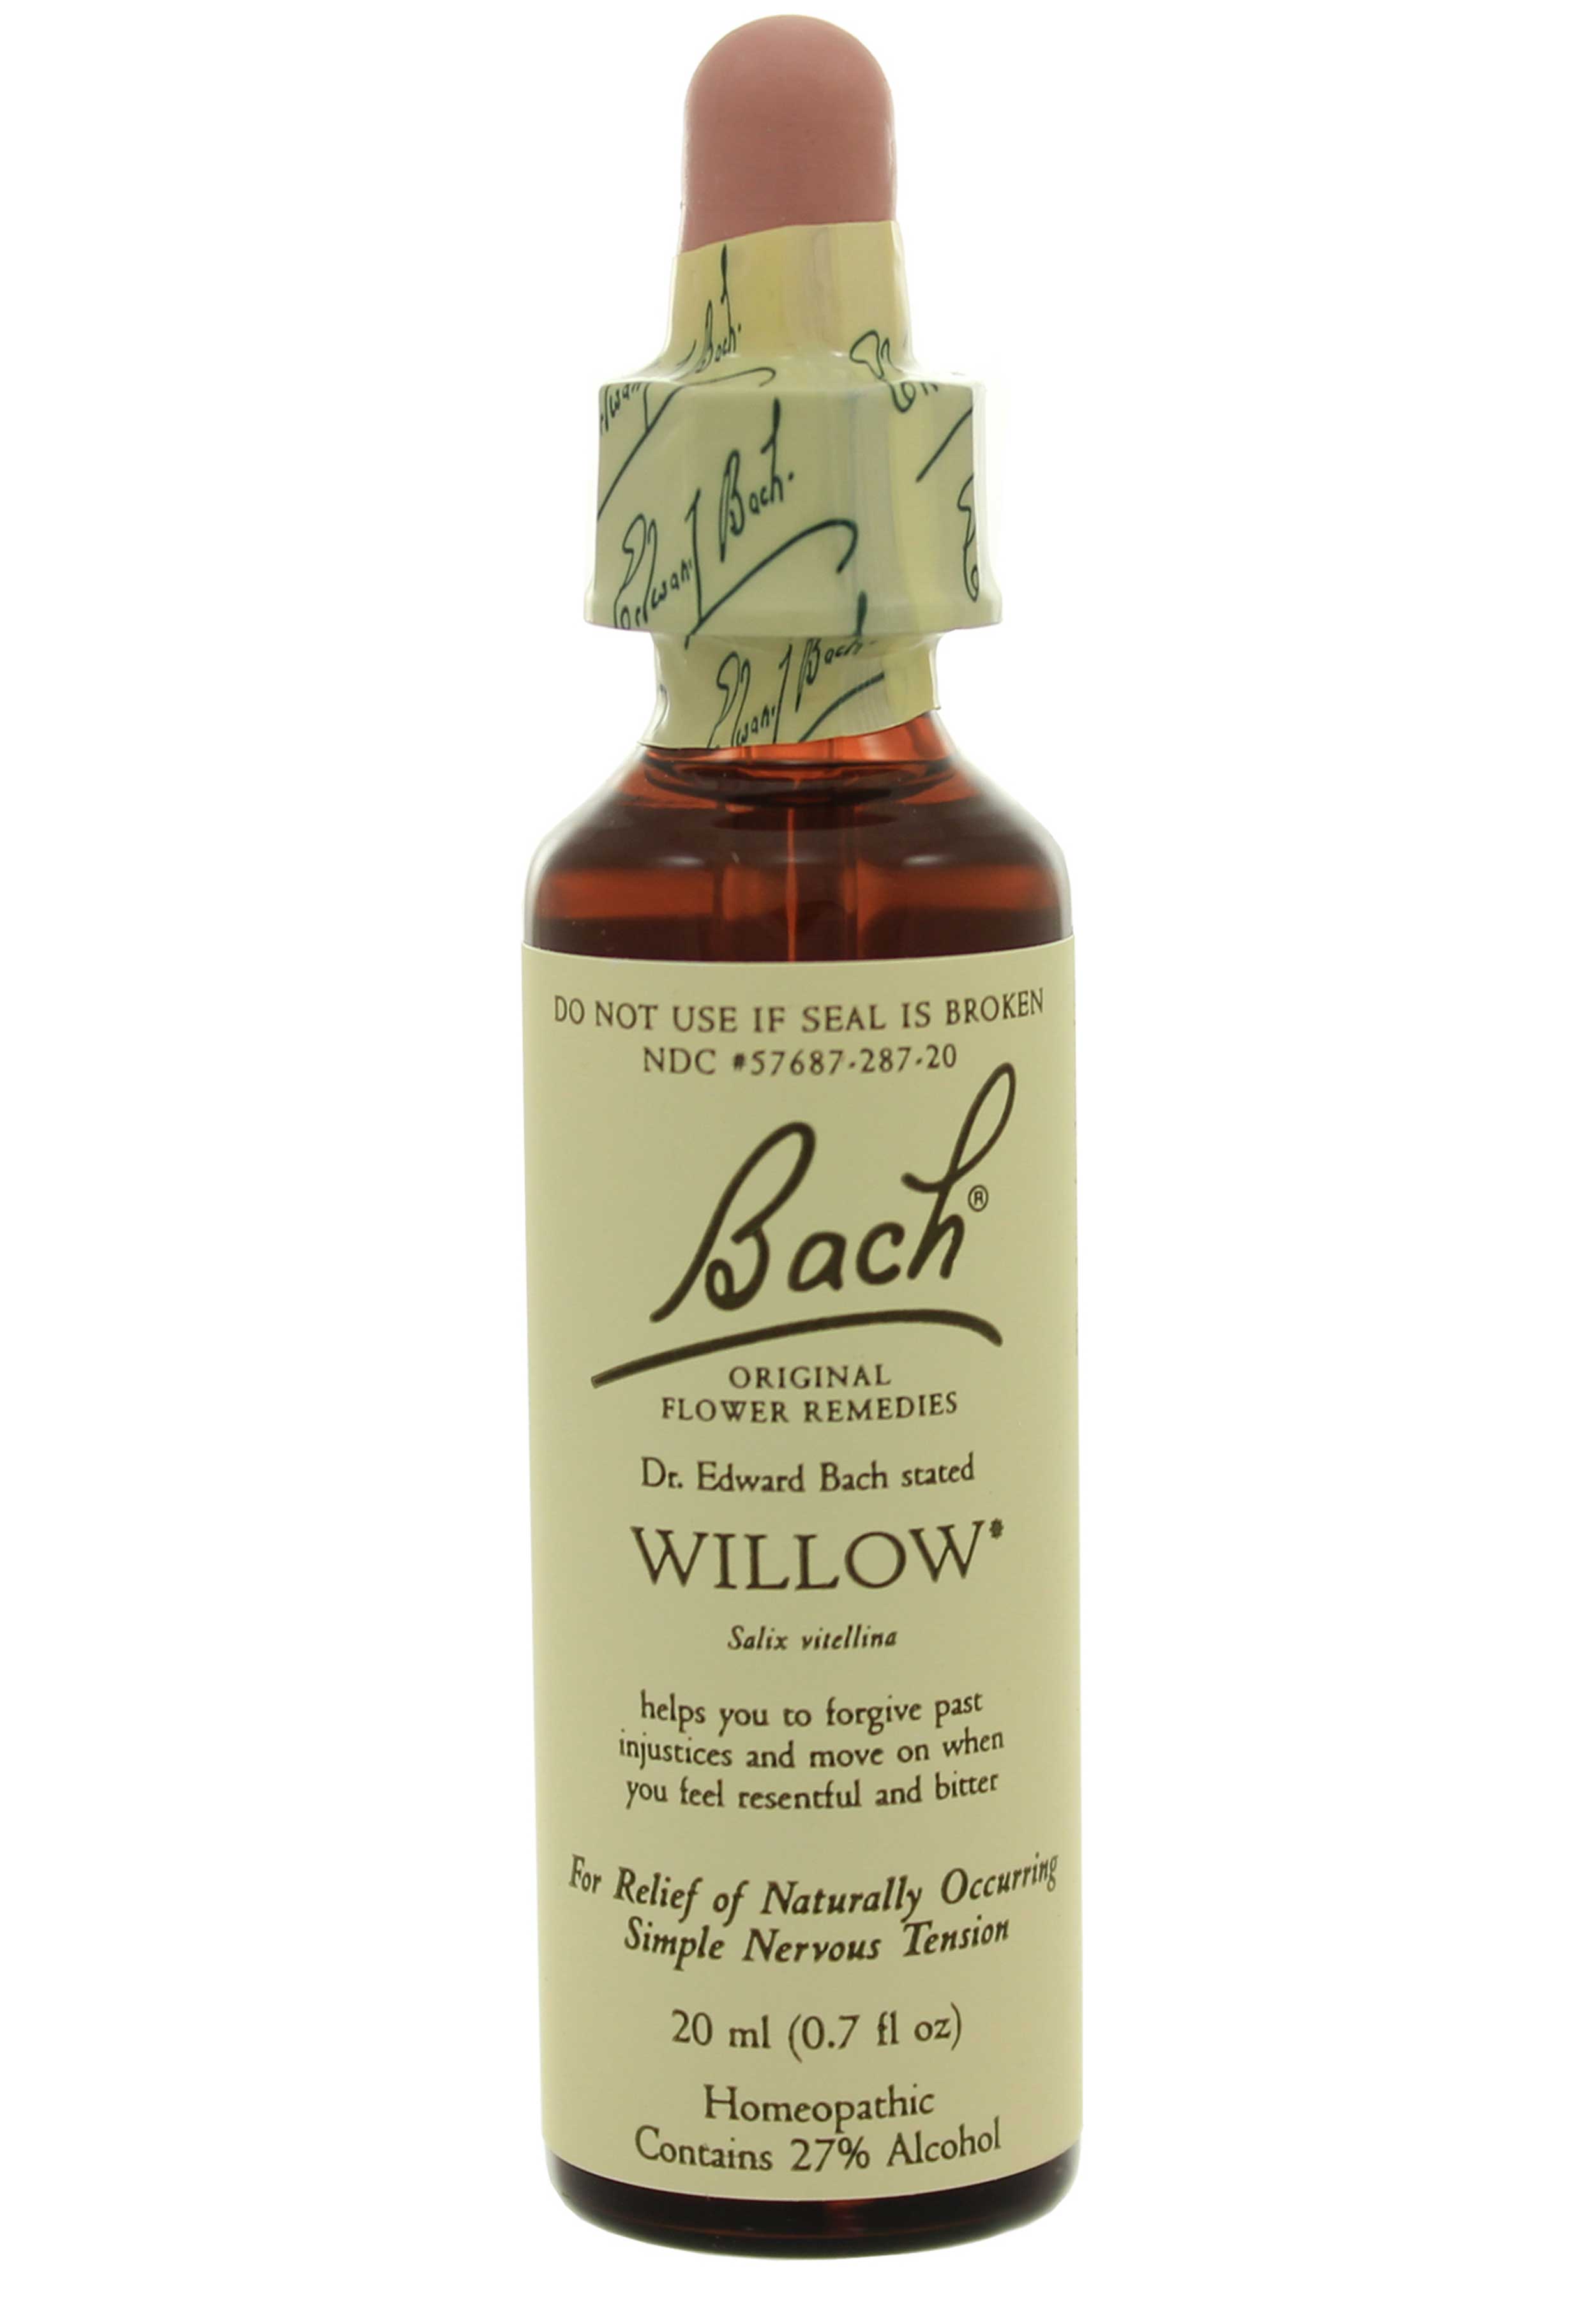 Bach Flower Remedies Willow